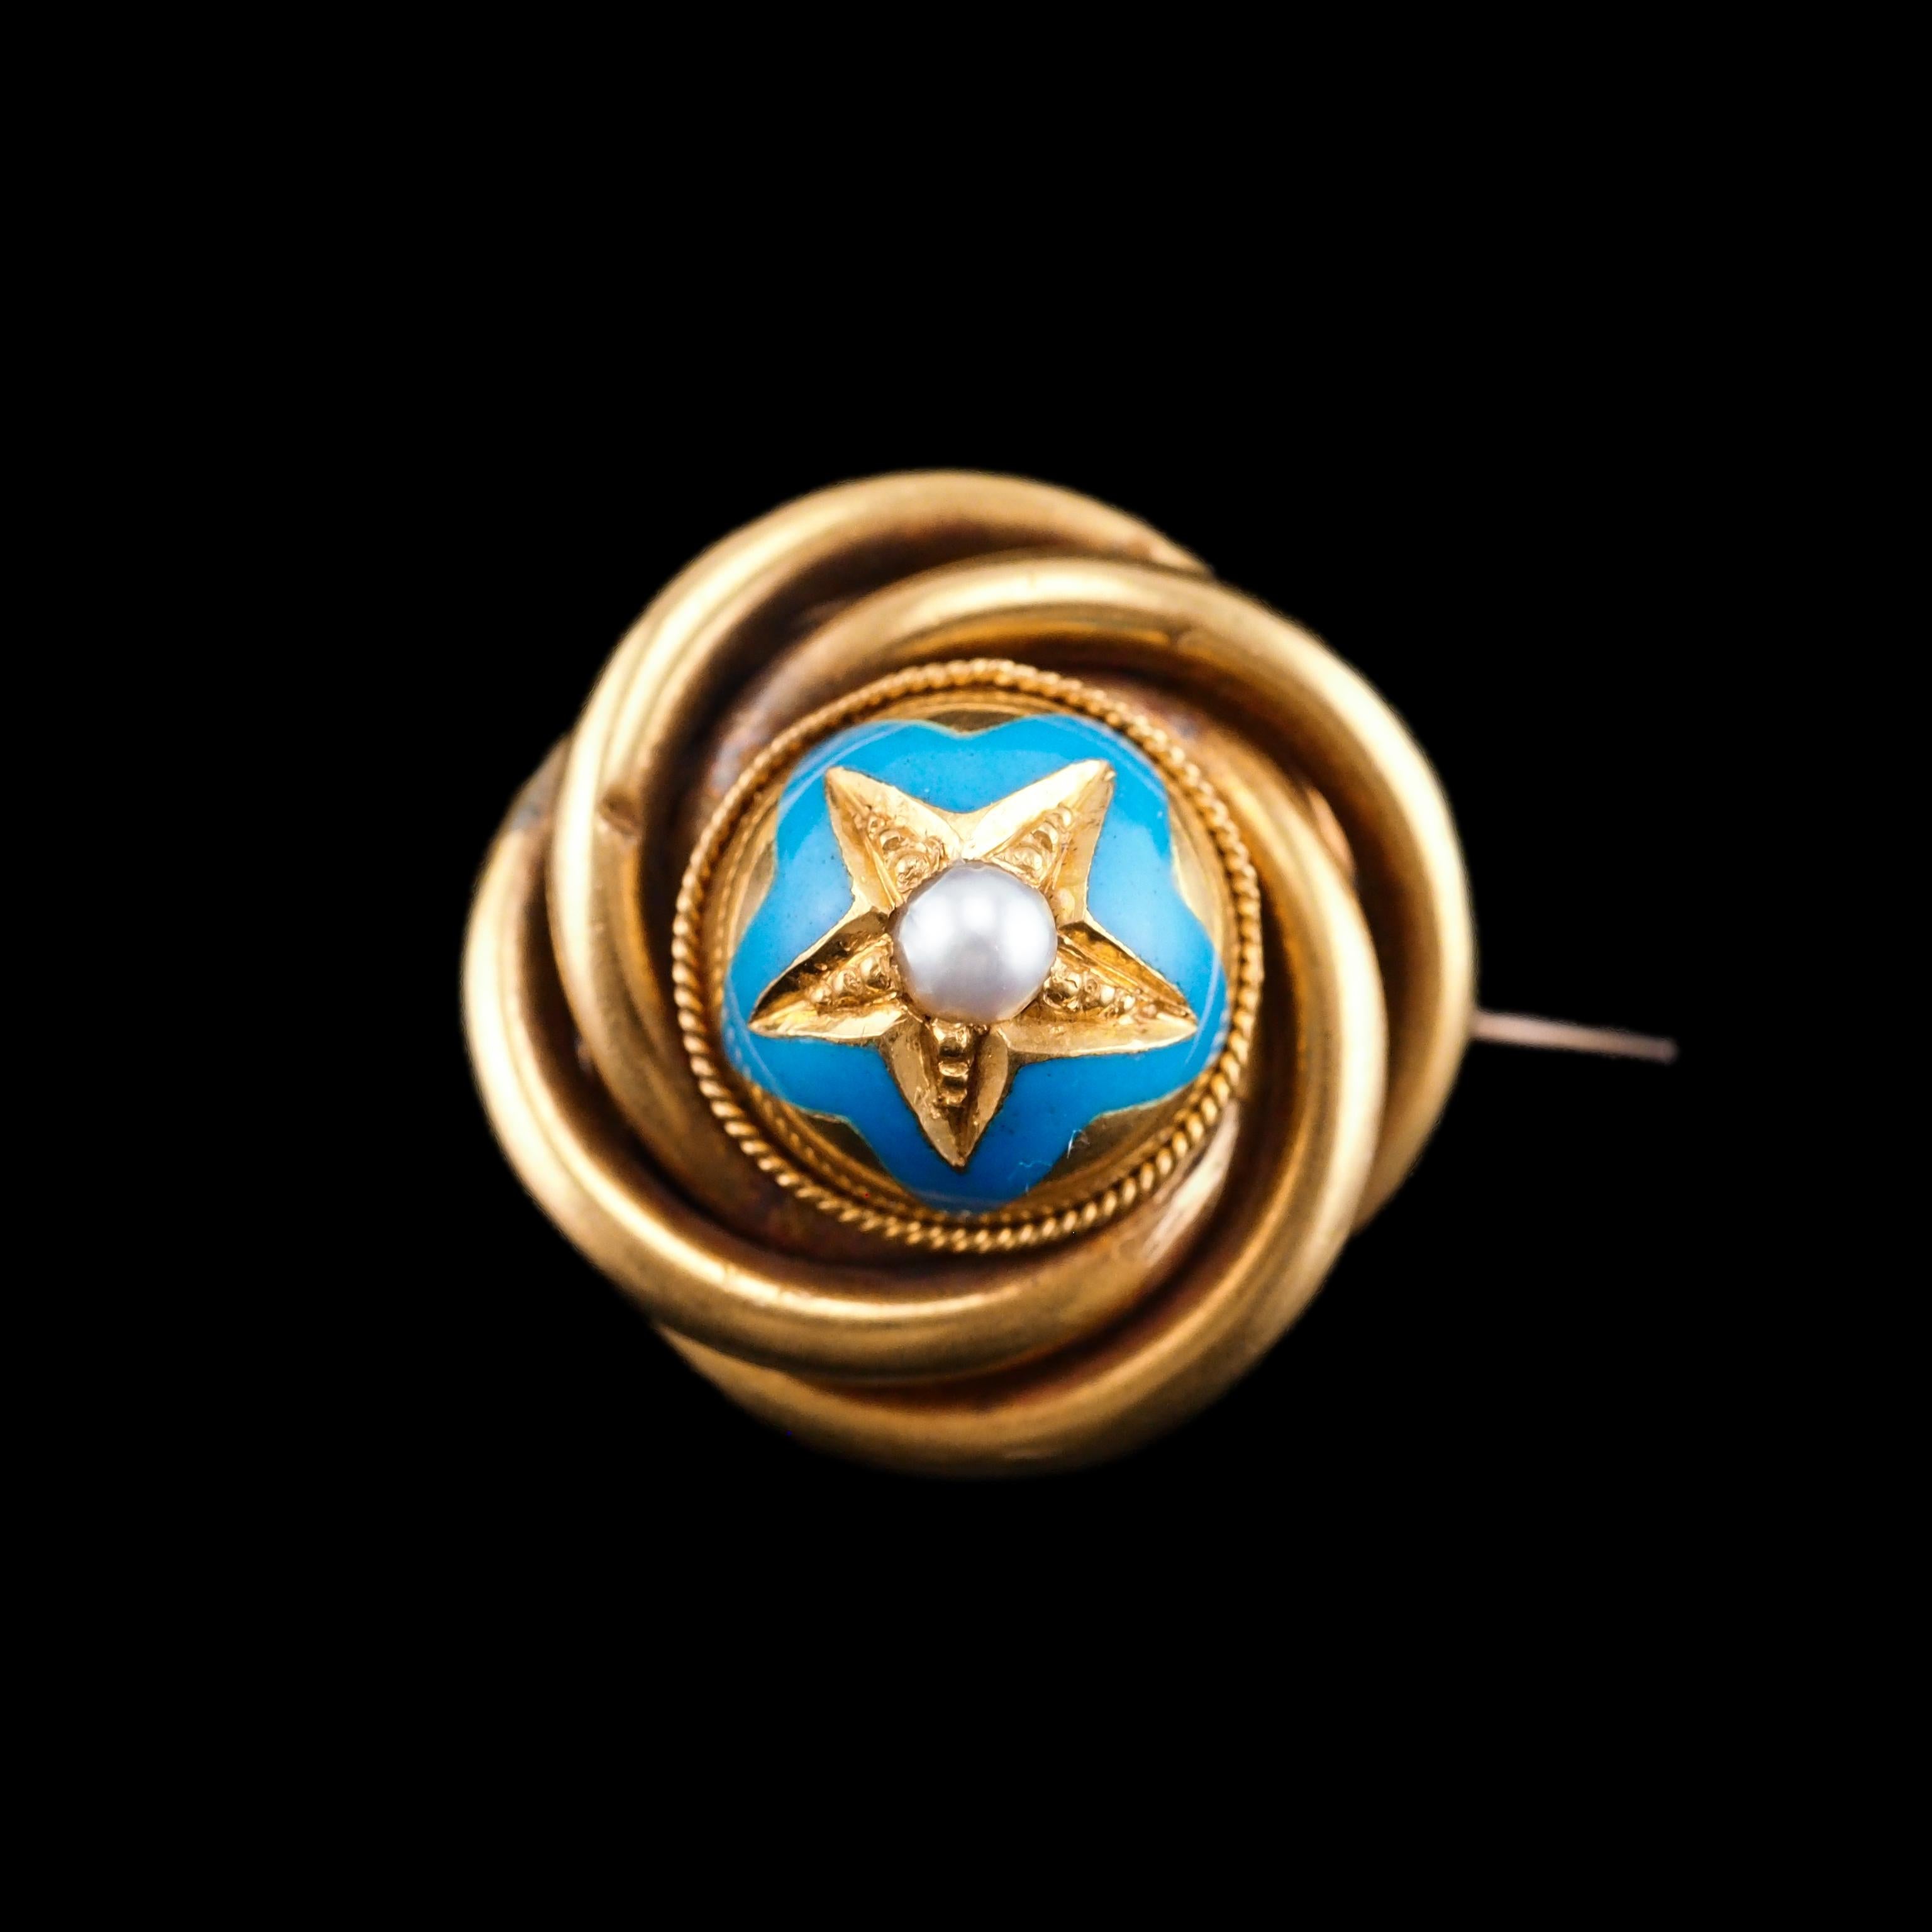 Antique Victorian 18K Gold Star Blue Enamel Pearl Brooch Pin - c.1880 For Sale 2